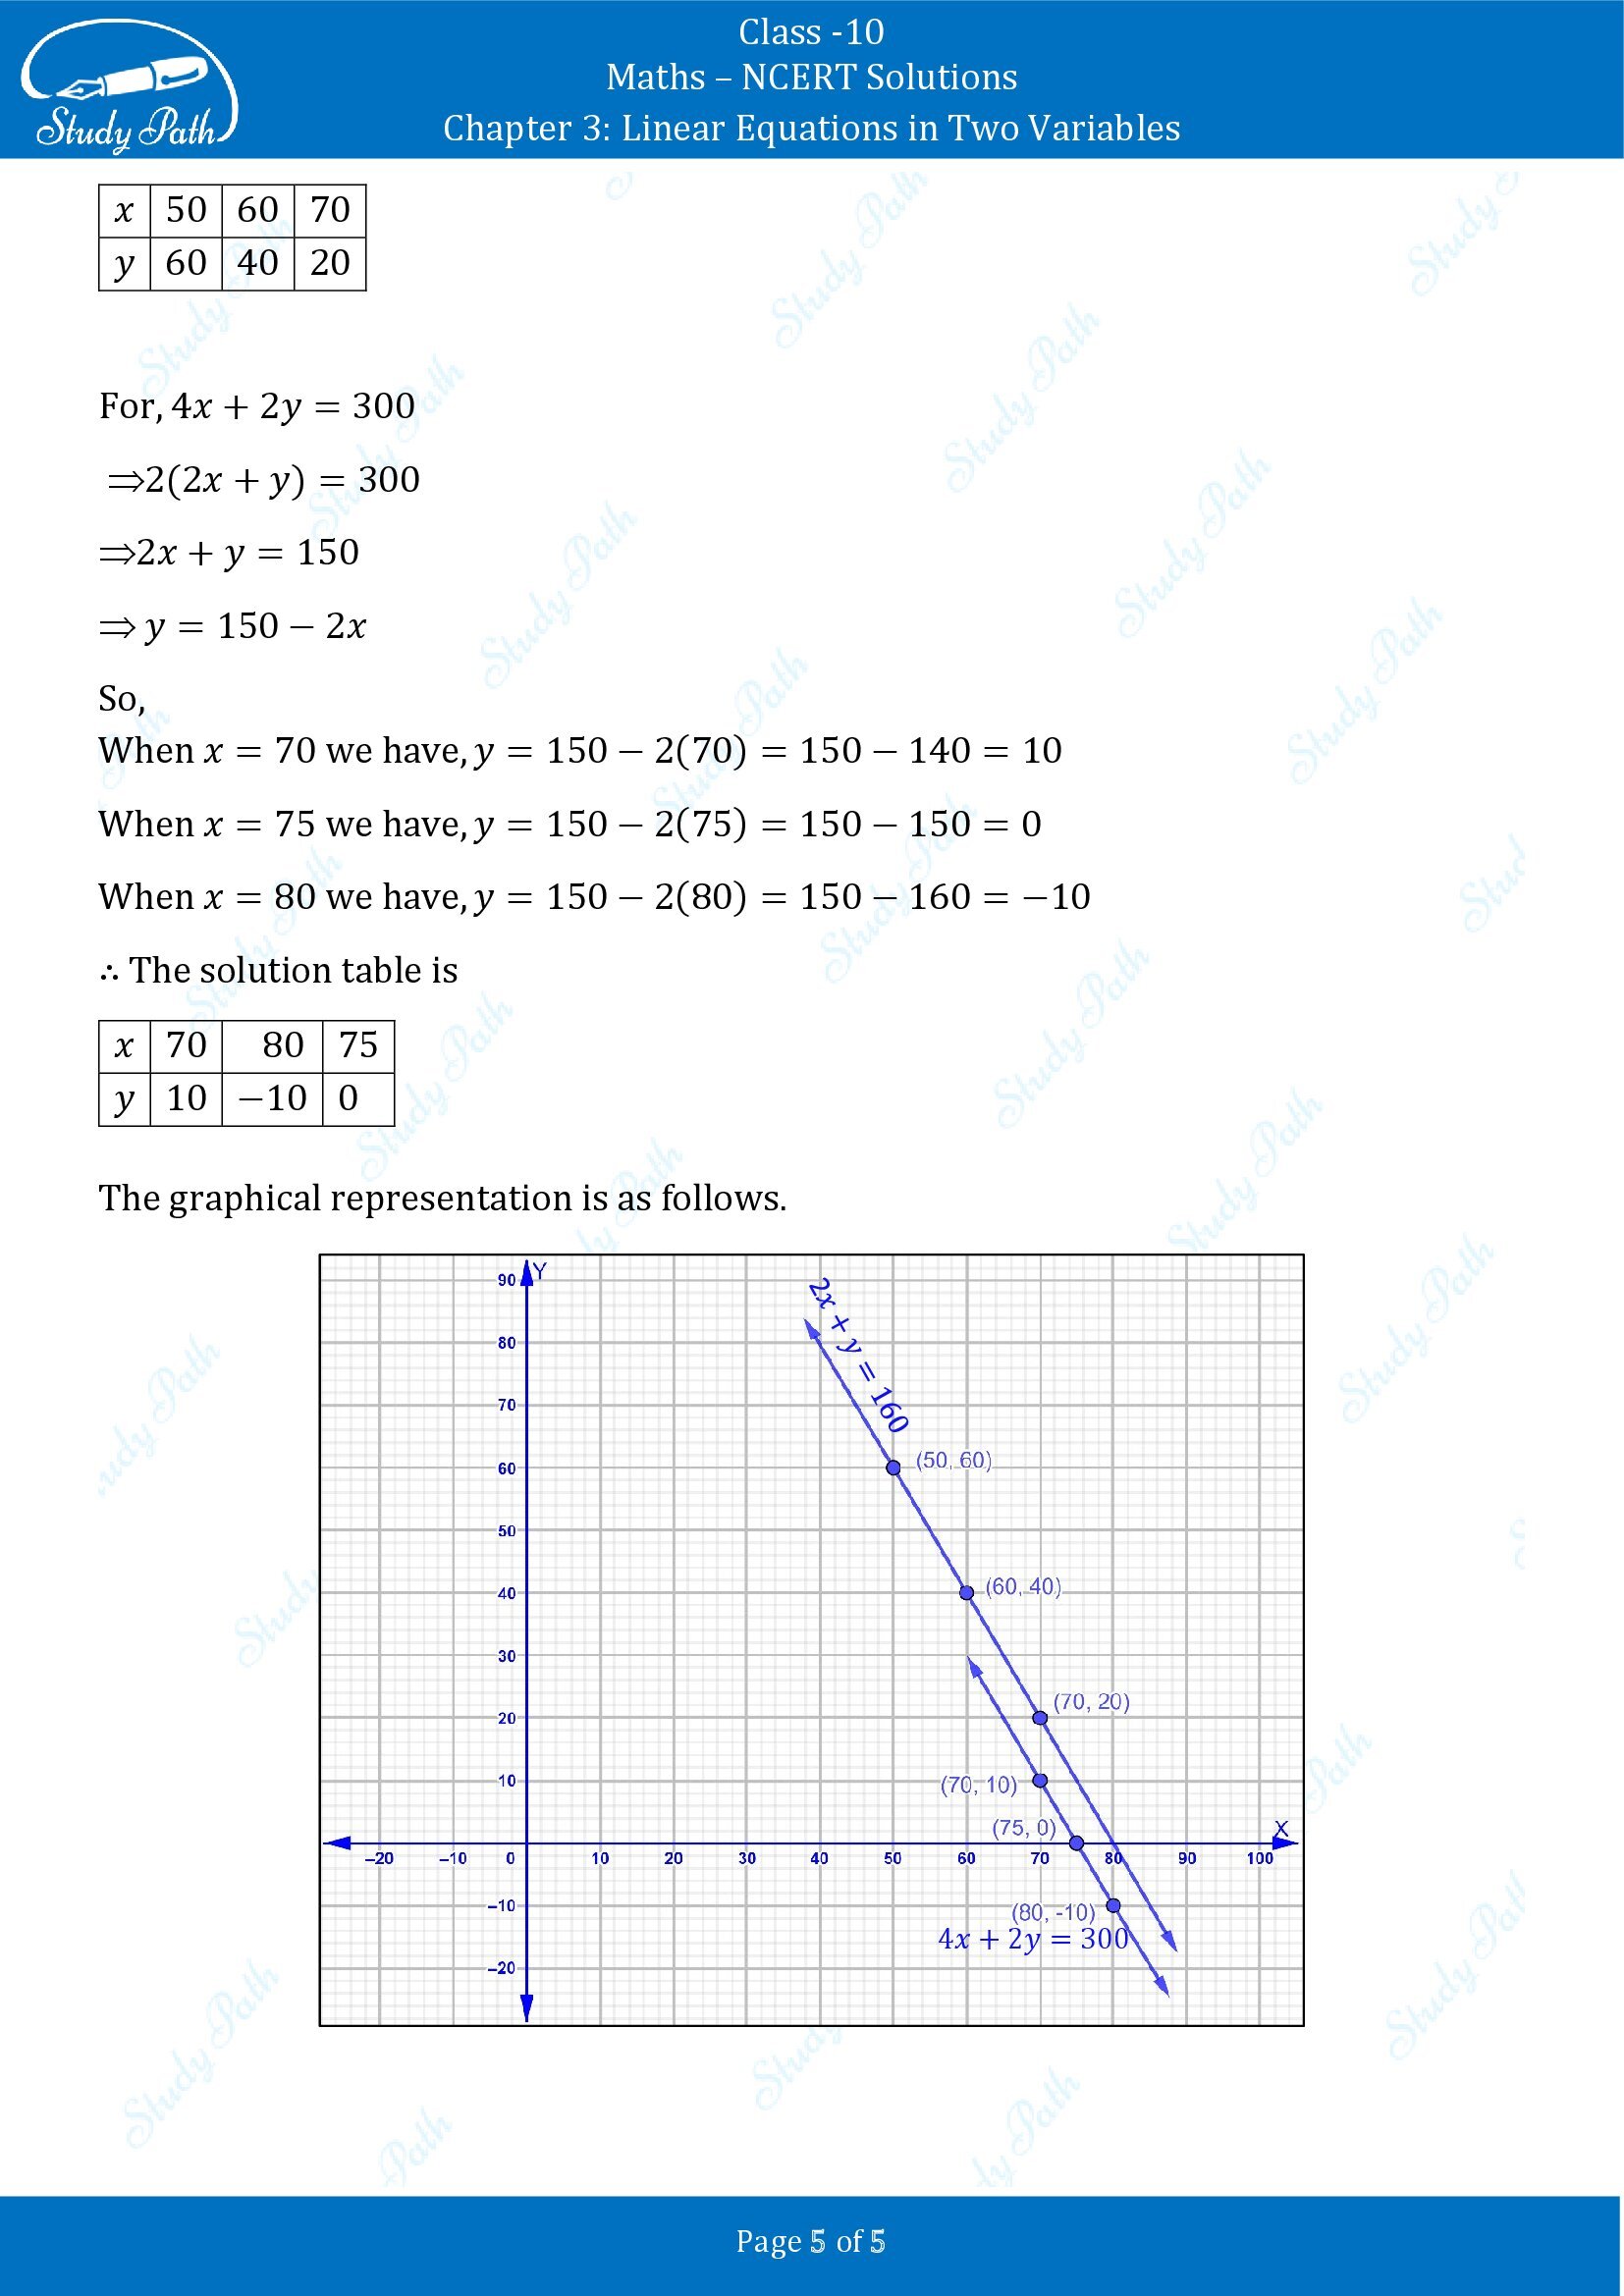 NCERT Solutions for Class 10 Maths Chapter 3 Linear Equations in Two Variables Exercise 3.1 00005